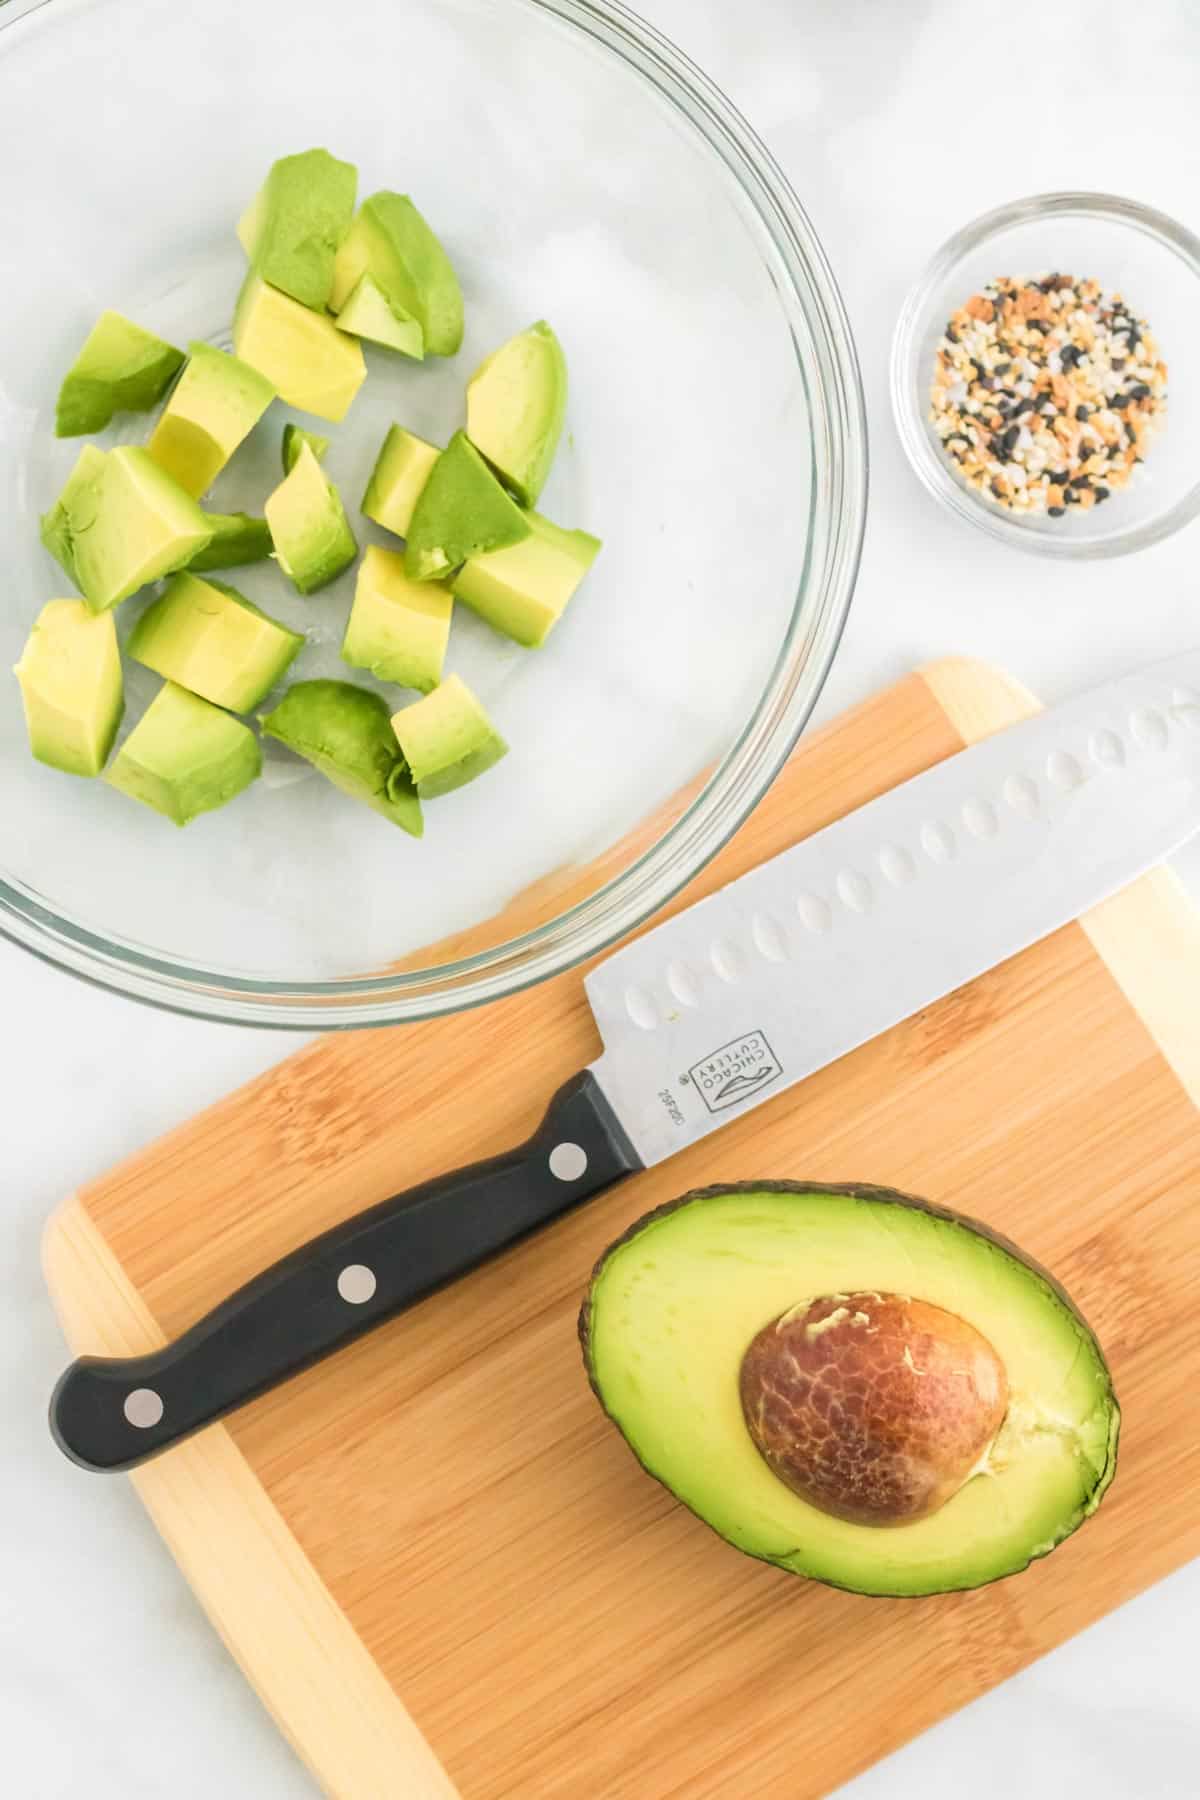 Half an avocado on a wooden cutting board next to a knife, with a bowl of diced avocado near by.